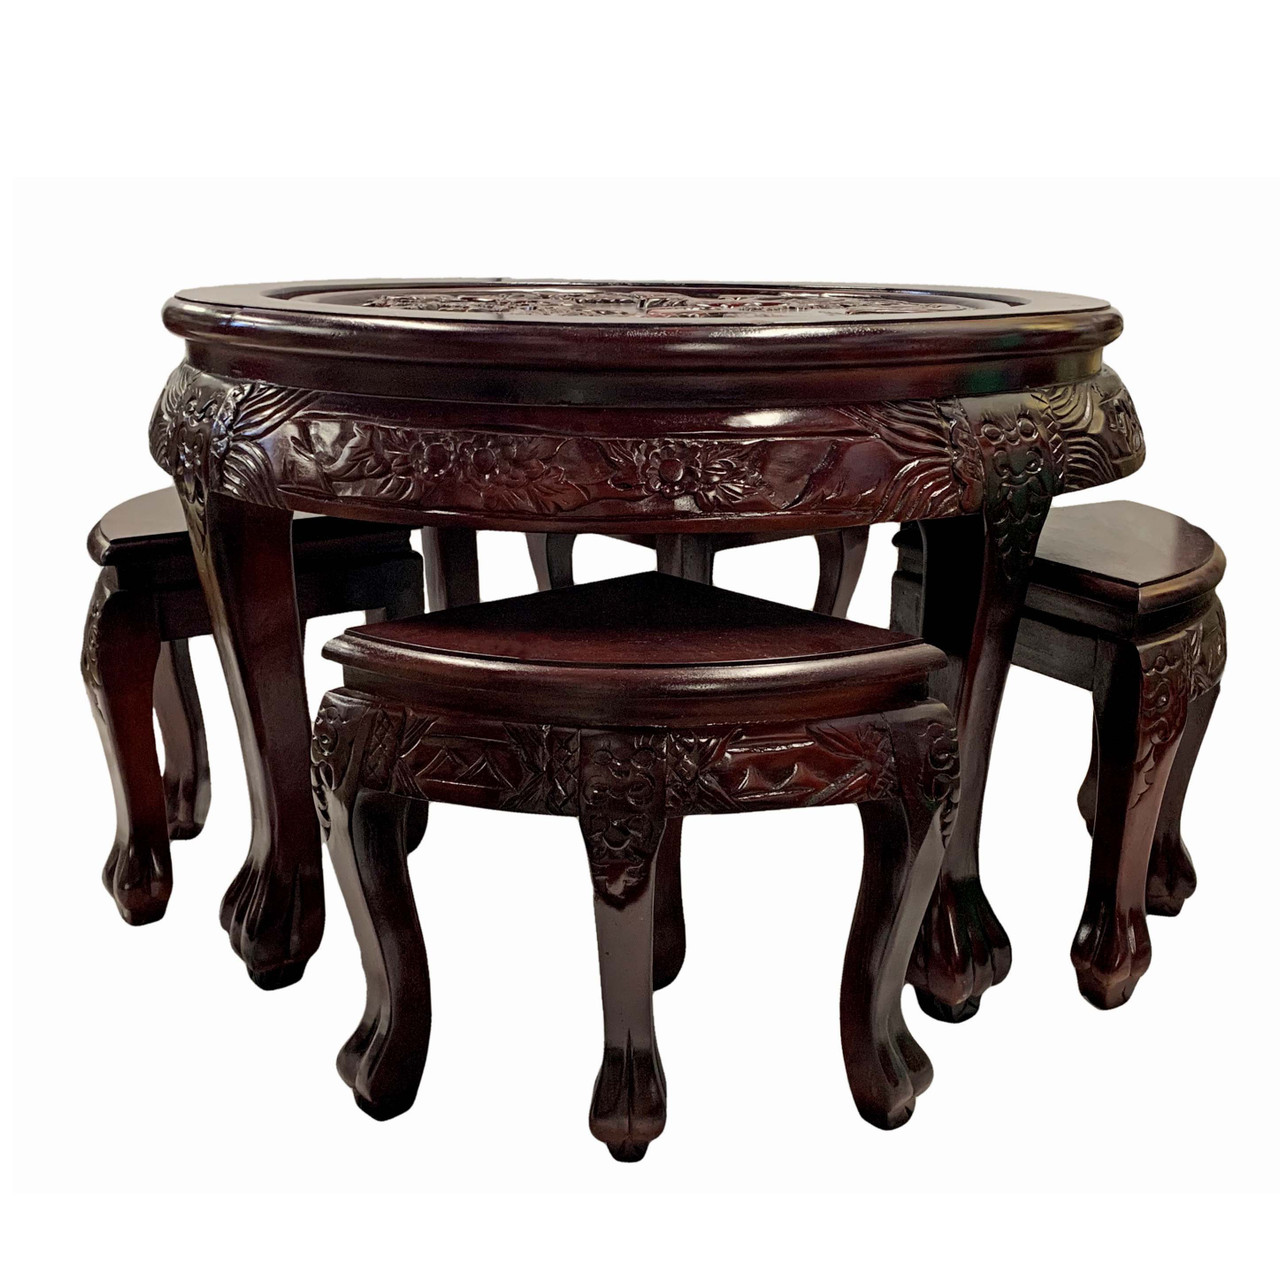 Round Coffee Table With Seats / Coffee Tables World Market : Using round coffee table with seats underneath is important to increase the mood of the house, coffee table will make catching.